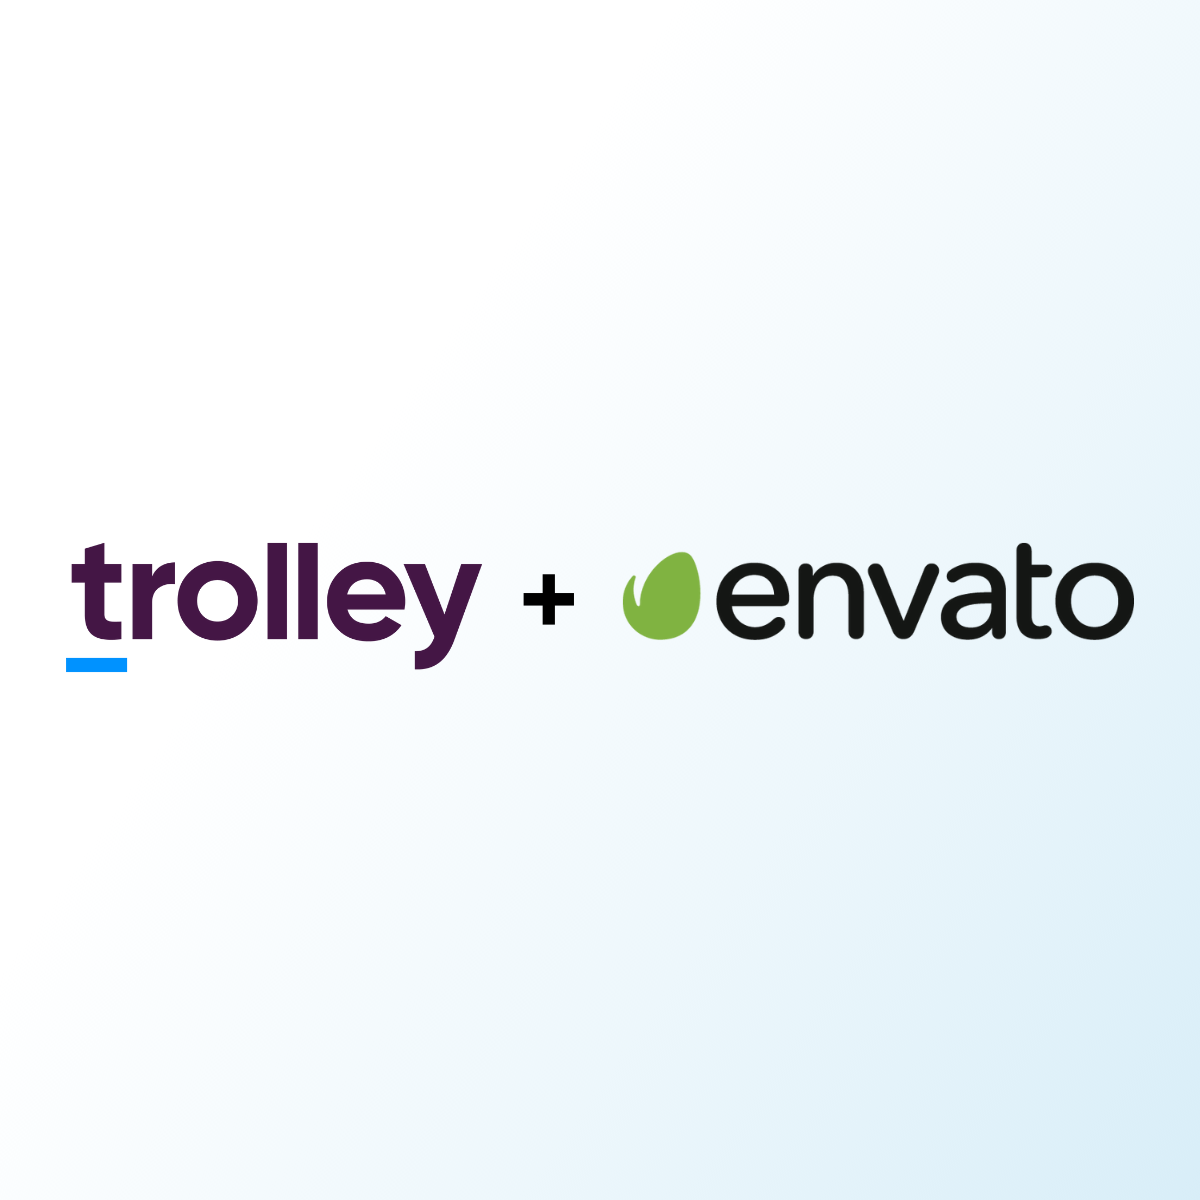 Trolley and Envato logos on a light blue background.